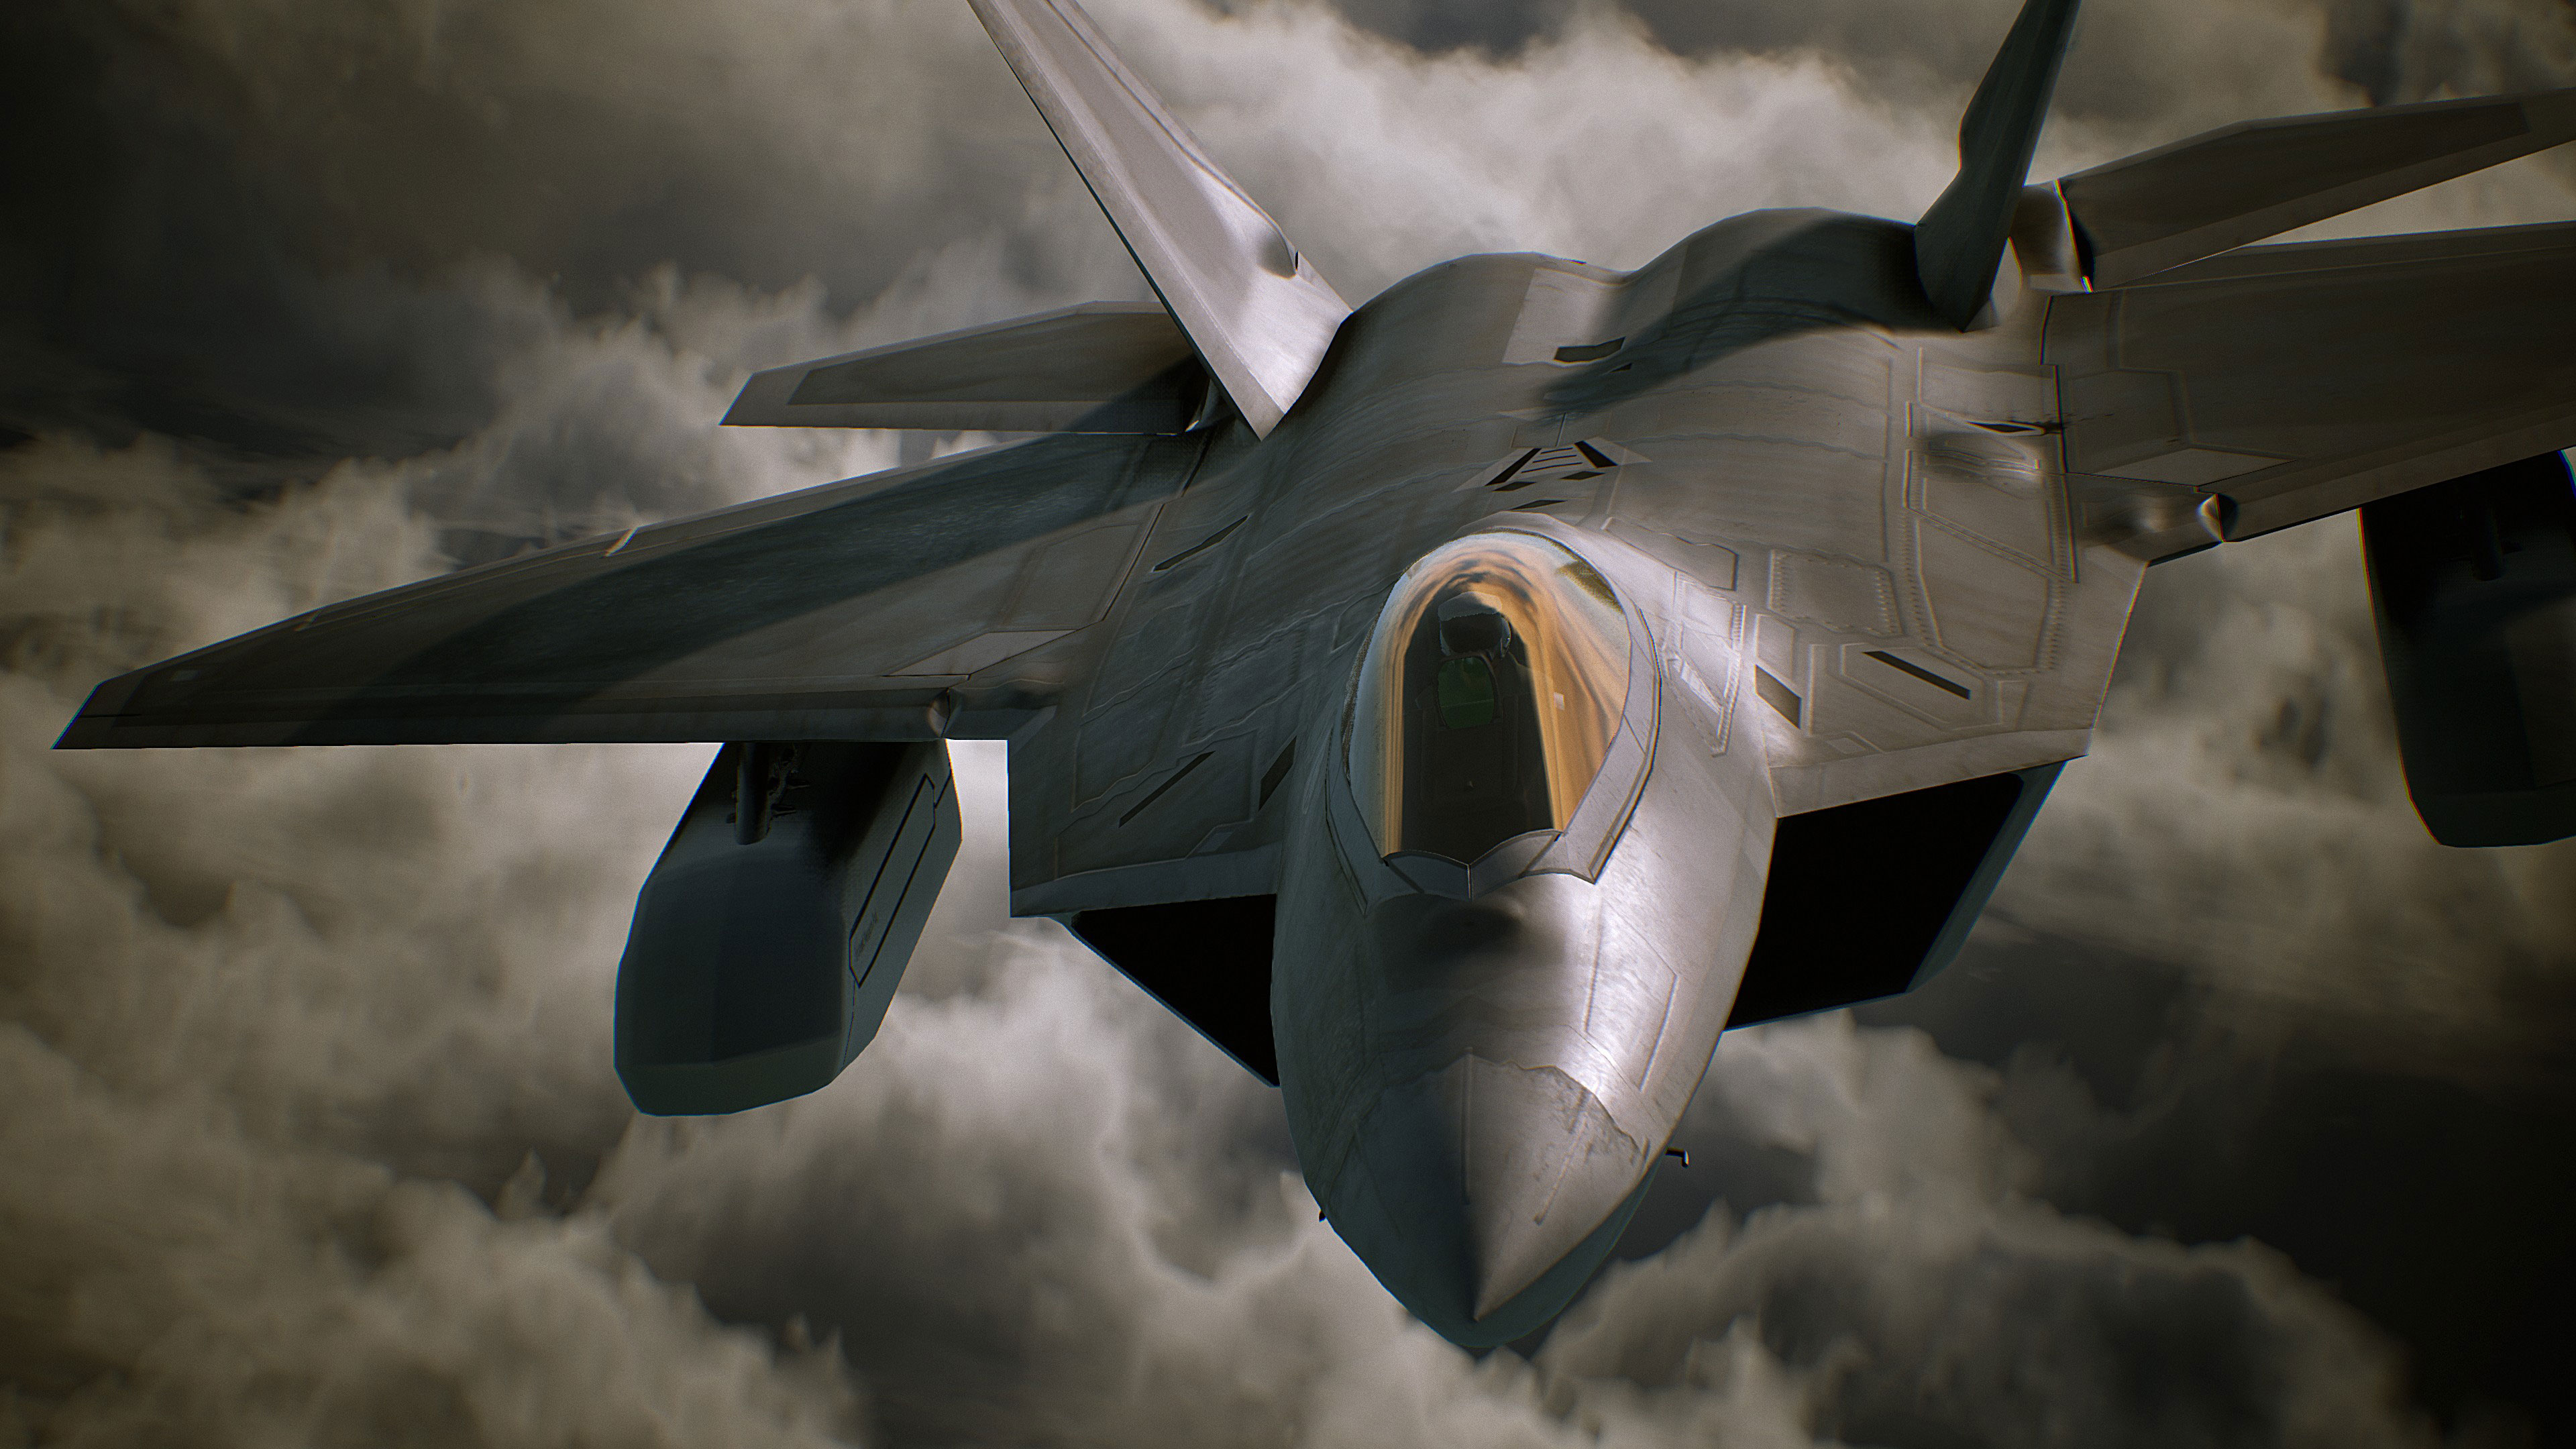 Ace Combat 7: Skies Unknown Wallpapers in Ultra HD | 4K - Gameranx